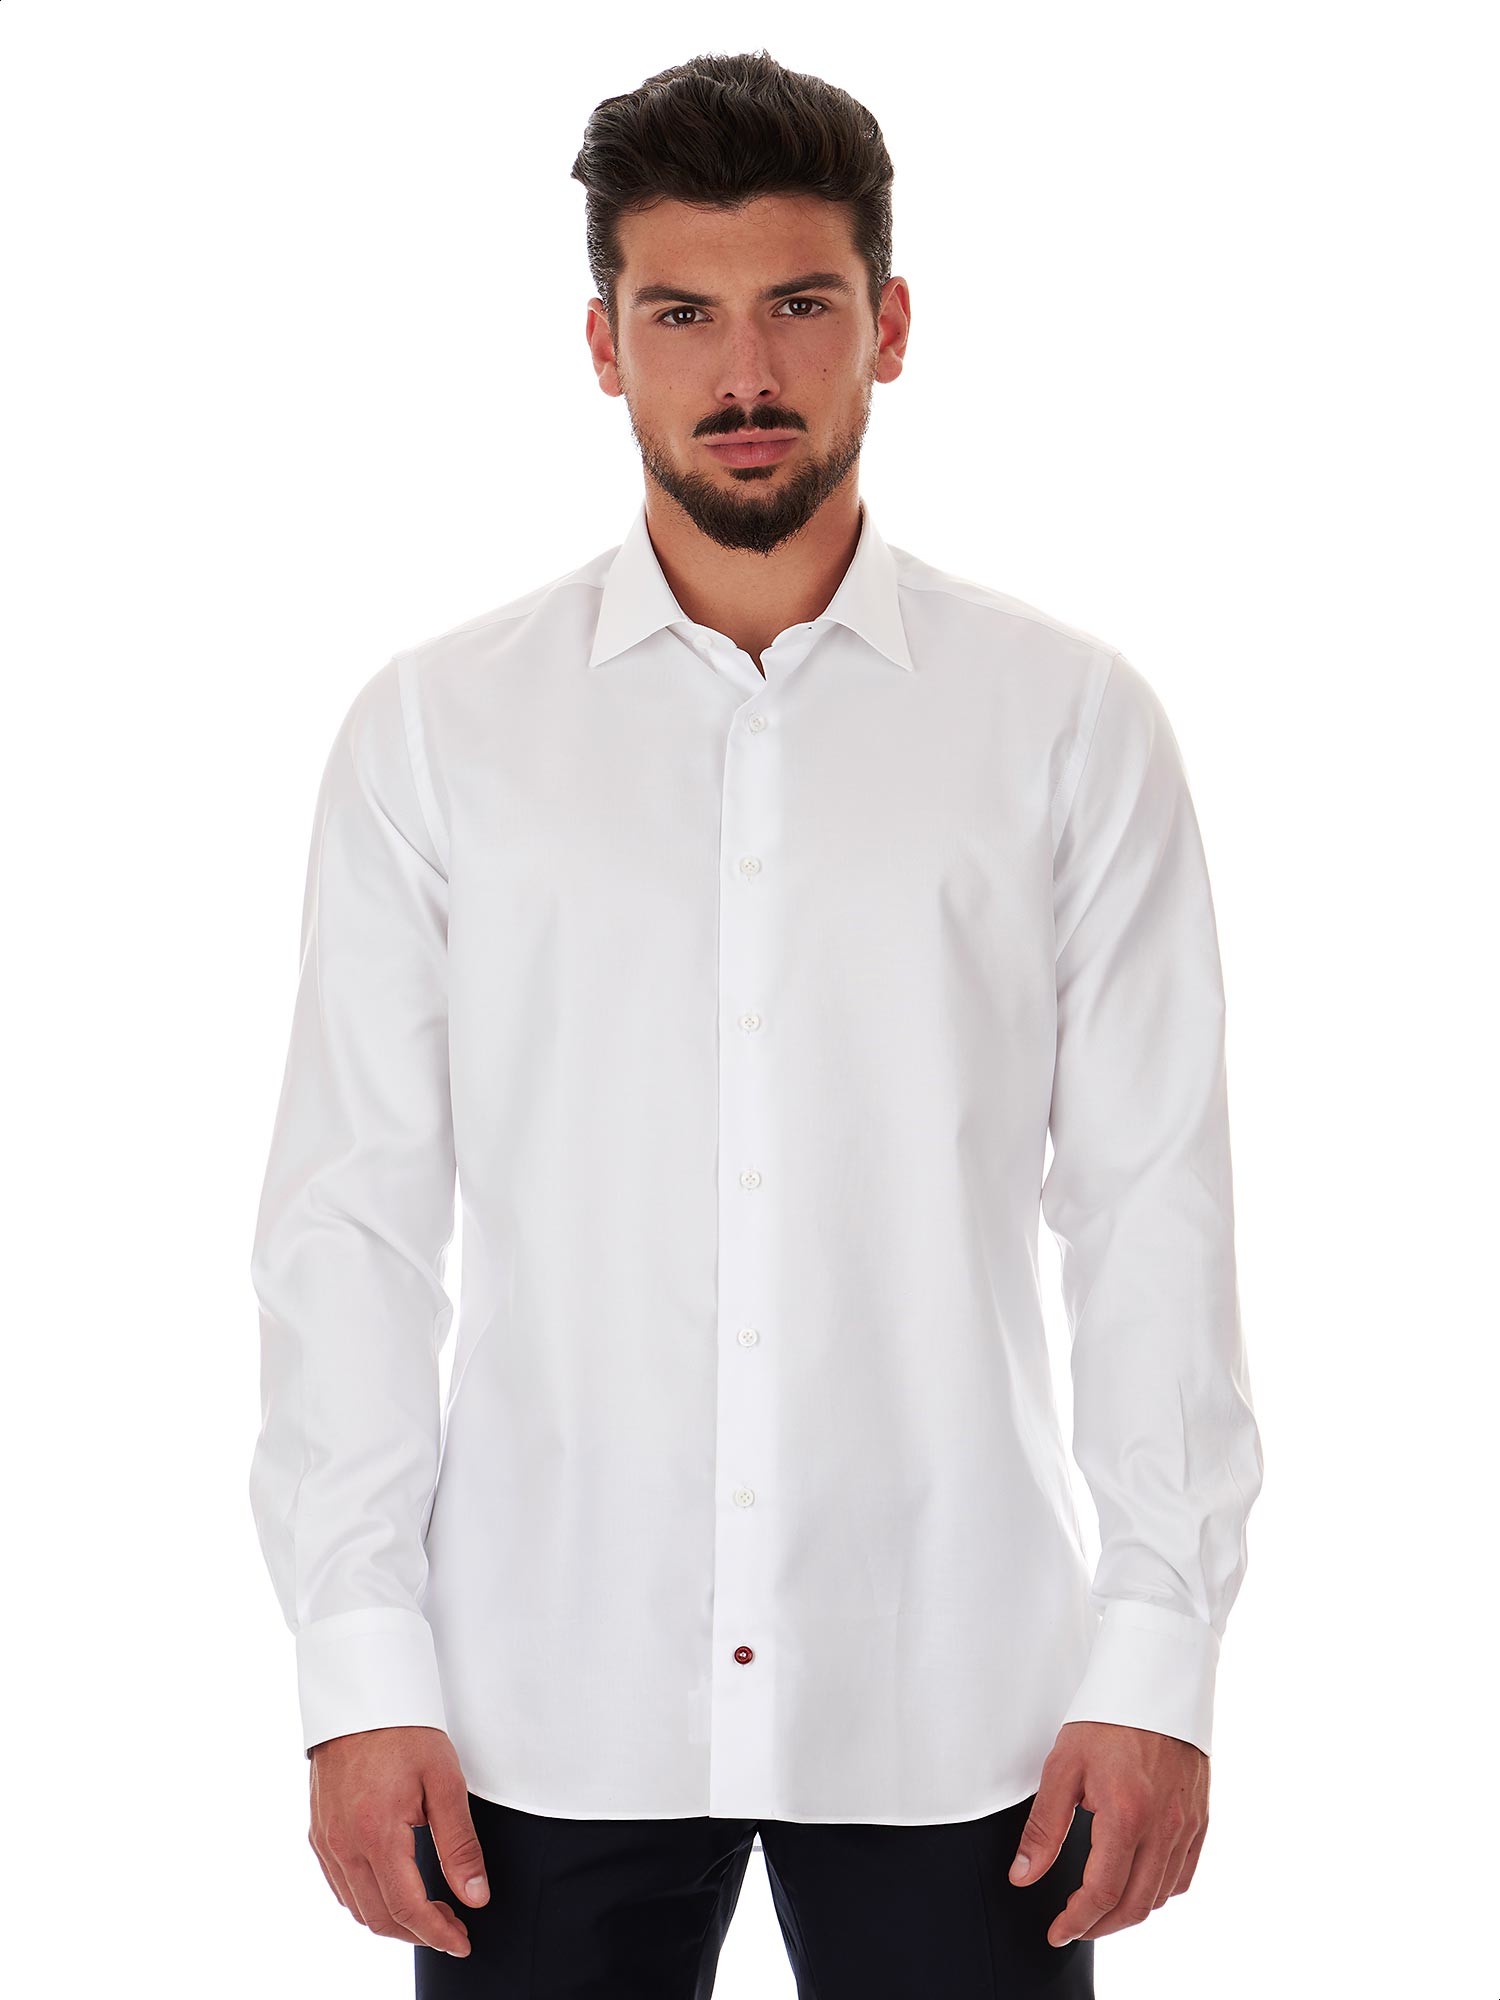 Càrrel - White high quality shirt double twisted fabric